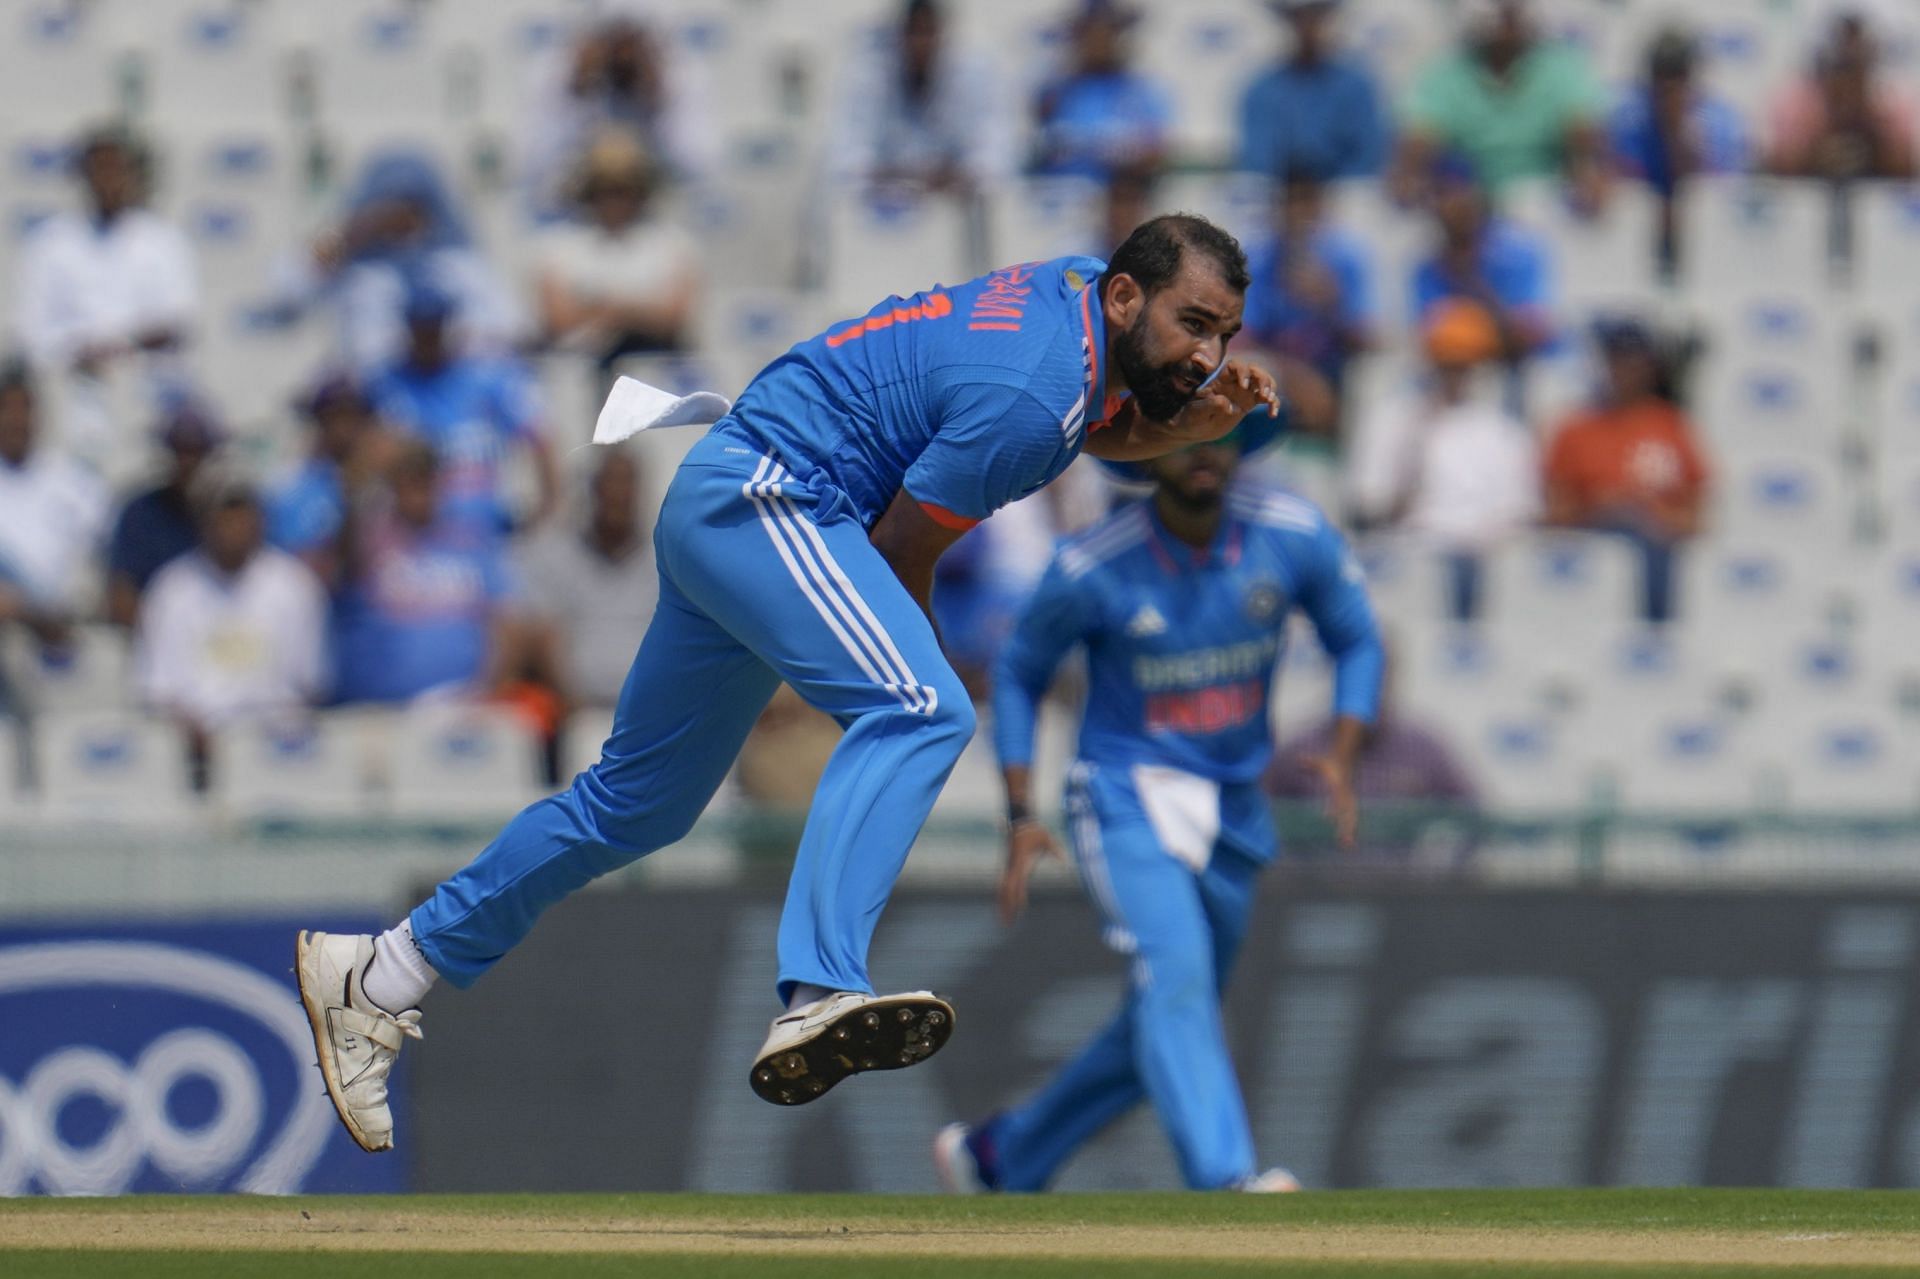 Mohammed Shami in his delivery stride.